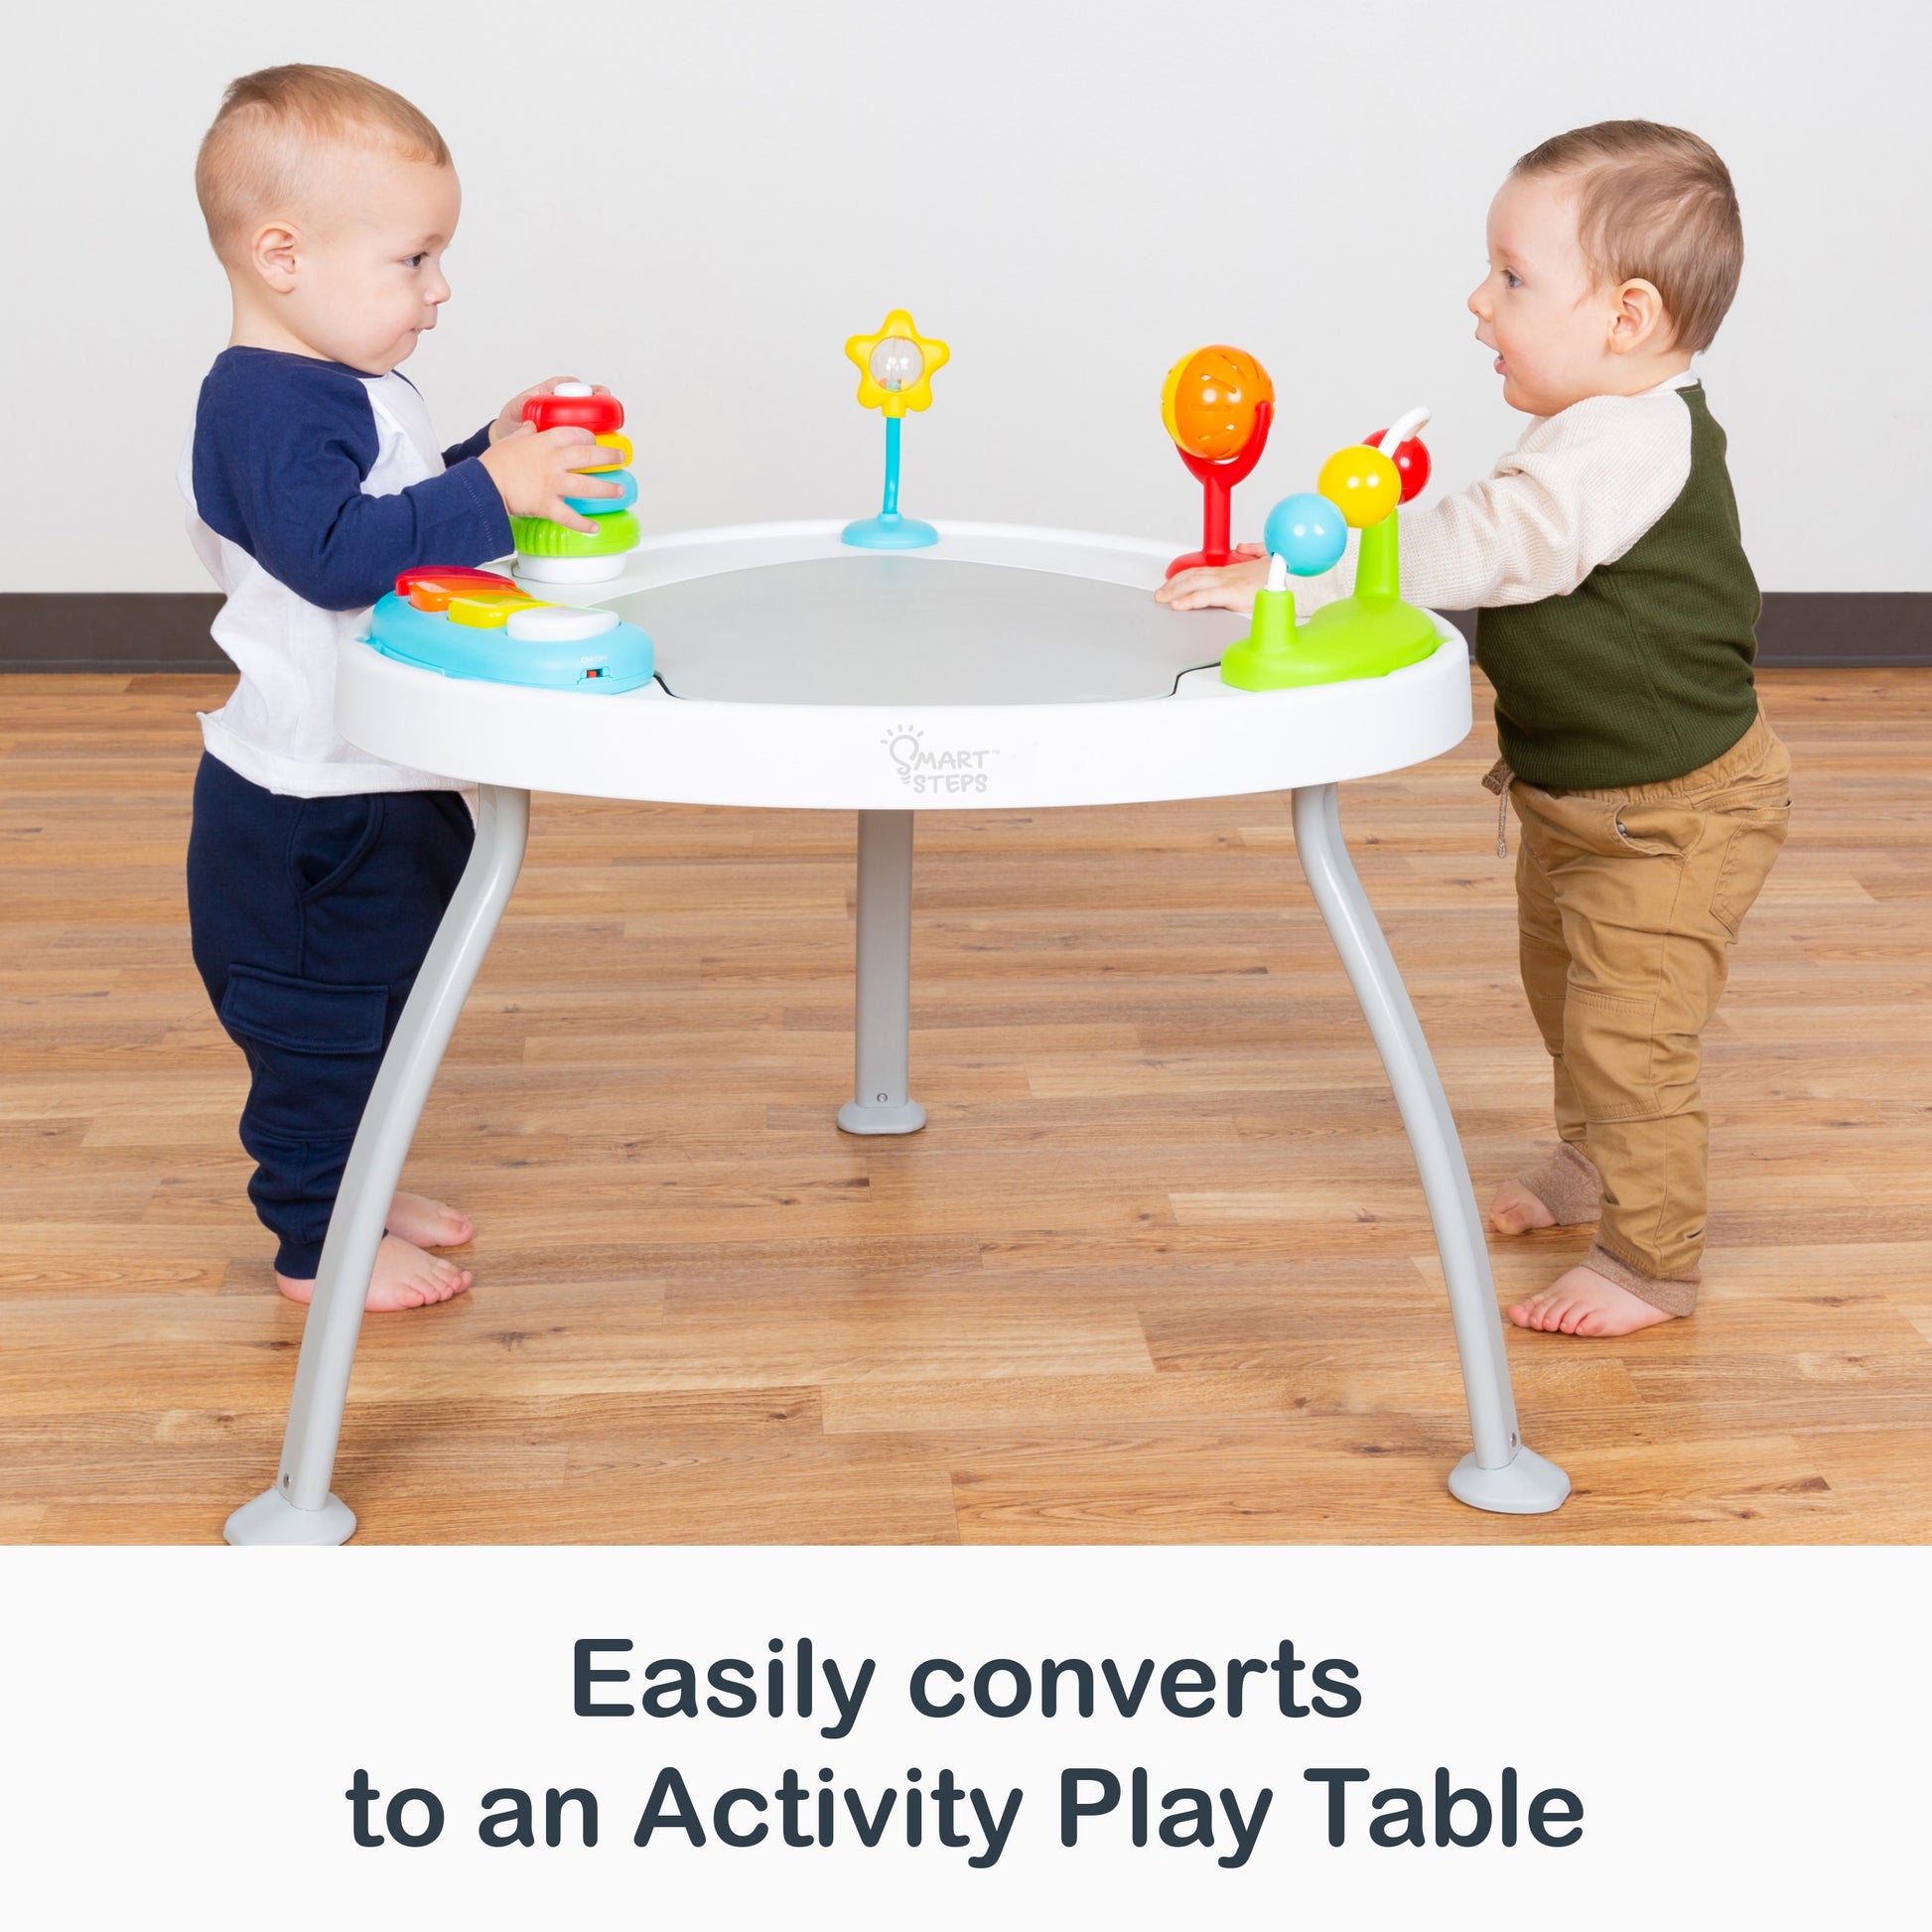 Smart Steps by Baby Trend Bounce N’ Play 3-in-1 Activity Center easily converts to an activity play table